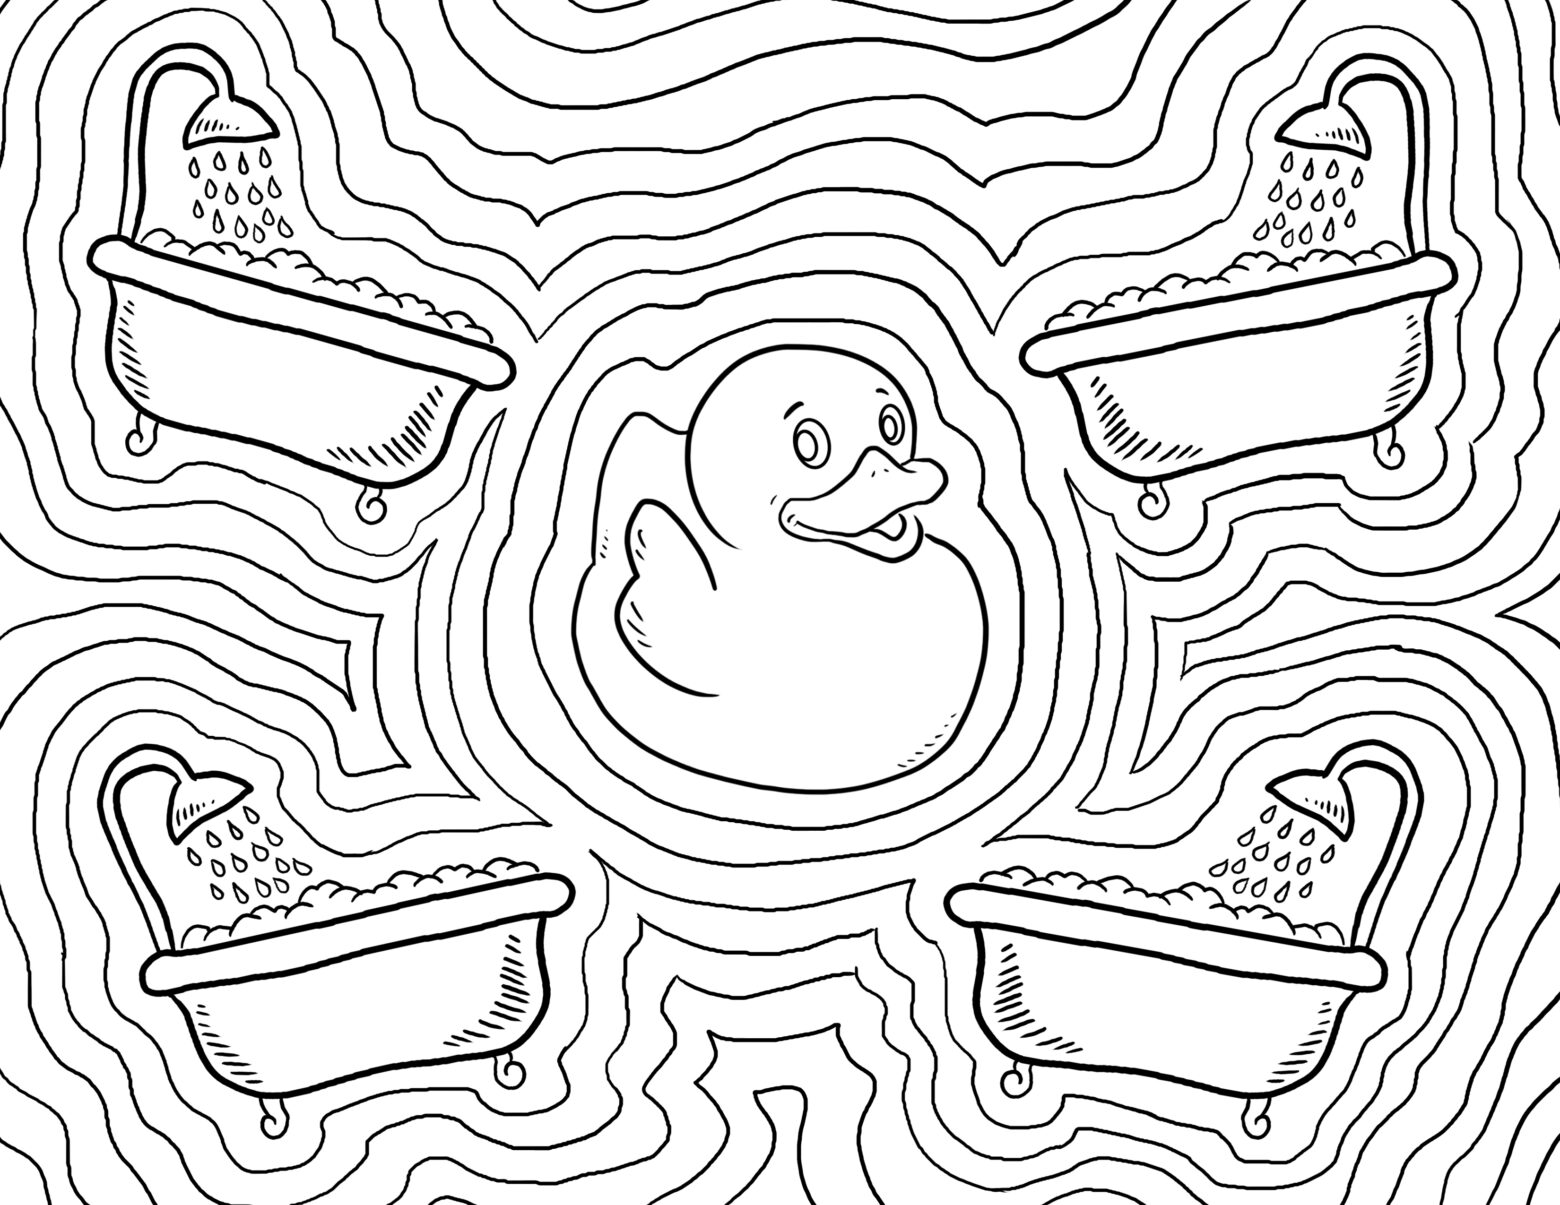 National Coloring Day: Win a Ducky!